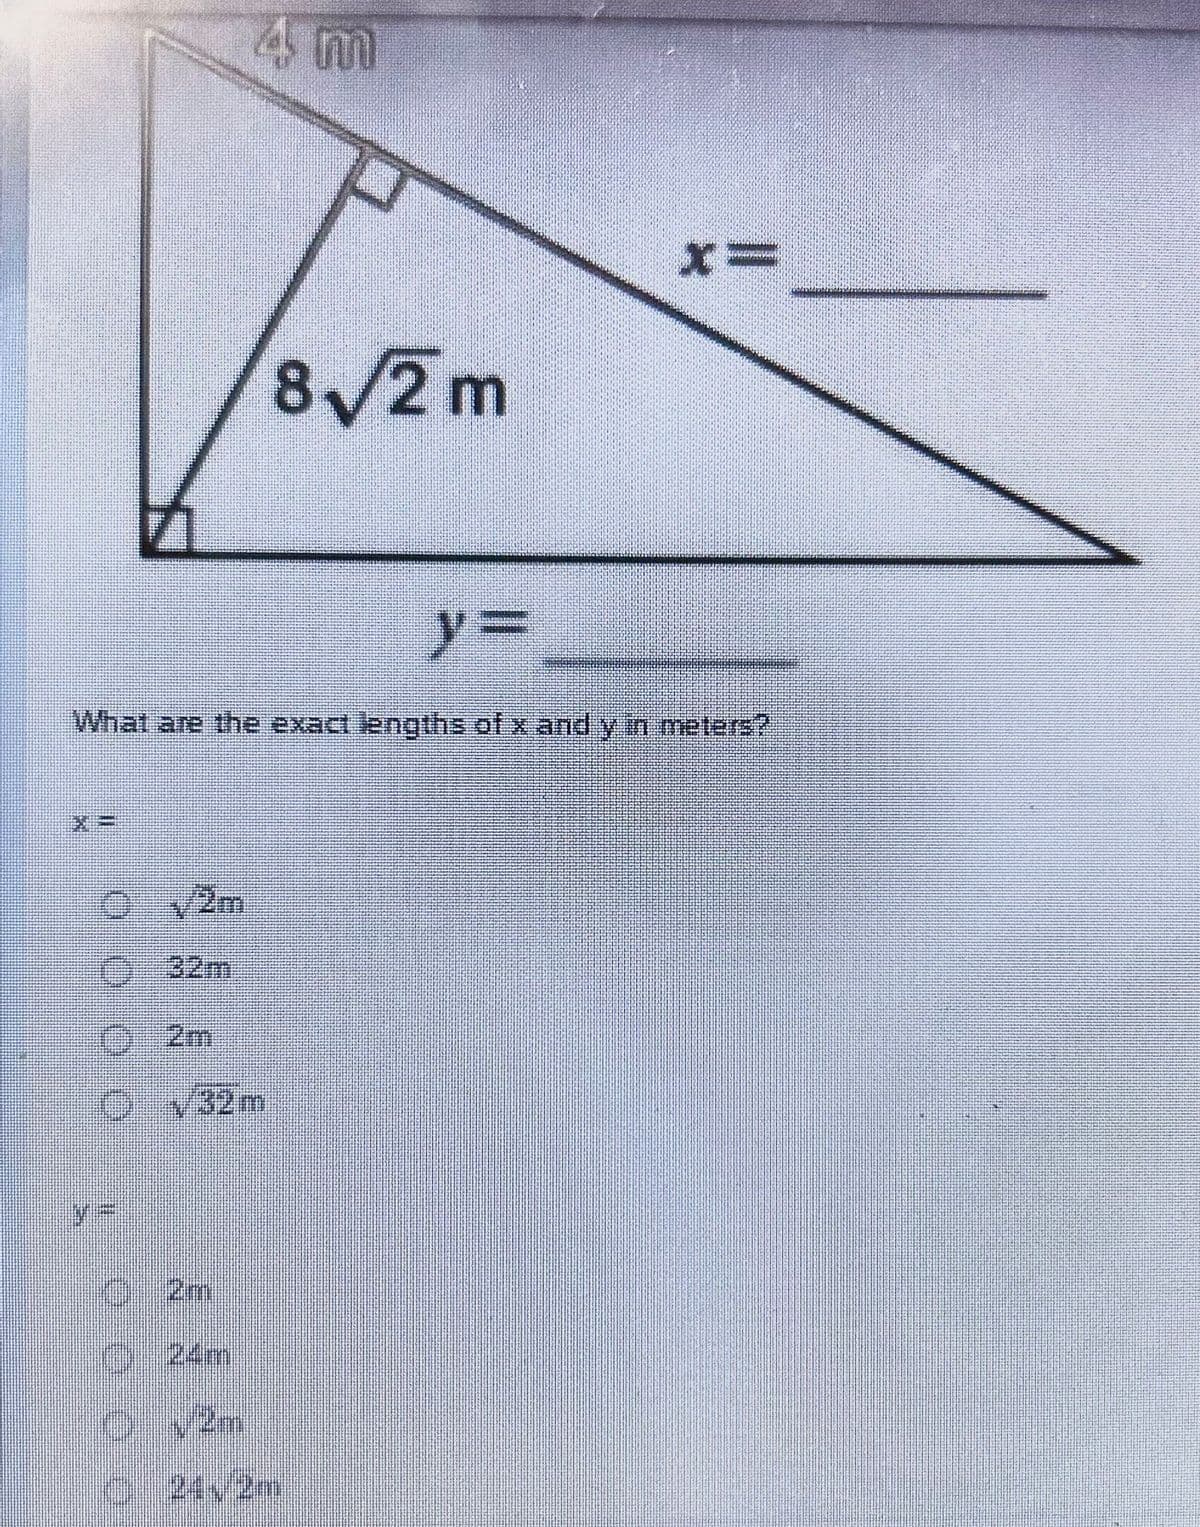 ### Pythagorean Theorem Application

#### Question:
Given the right-angled triangle diagram, with one leg measuring \(4\) meters and the hypotenuse measuring \(8\sqrt{2}\) meters, determine the exact lengths of the remaining leg \(x\) and the remaining leg \(y\) in meters.

\[x = \]

\[y = \]

#### Options for \(x\):
- \( \sqrt{2}m \)
- \( 32m \)
- \( 2m \)
- \( \sqrt{32}m \)

#### Options for \(y\):
- \( 2m \)
- \( 24m \)
- \( \sqrt{2}m \)
- \( 24\sqrt{2}m \)

### Diagram Explanation:
The diagram is a right-angled triangle. 
- One leg is labeled \(4m\).
- The hypotenuse is labeled \(8\sqrt{2}m\).
- The two remaining leg lengths to be found are labeled \(x\) and \(y\) respectively.

### Solution Approach:
To determine the exact lengths of \(x\) and \(y\), apply the Pythagorean Theorem:

\[a^2 + b^2 = c^2 \]

Where \(a\) and \(b\) are the legs of the right triangle, and \(c\) is the hypotenuse.

For this triangle:
\[ 4^2 + x^2 = (8\sqrt{2})^2 \]
\[ 16 + x^2 = 128 \]
\[ x^2 = 128 - 16 \]
\[ x^2 = 112 \]
\[ x = \sqrt{112} \]
\[ x = 4\sqrt{7} \] 

But considering the given options match standard forms, 
it seems like there might need to be an evaluation simplification for the testing recheck.

For classic formulation;
If Lengths demanded policing in distinct forms crucially here;
\[ \text{Note: It commonly coordinates further checks but initiating from these.\]

Review Formats considered
\[y\check{}\ = \ \sqrt{(Hypotenuse\ Formulation \ square \longi)\]\.

Thereto Studying Considering dia reform ratified visibly alike,

Thus Verified Forms:  

verifying Computation affinity assure validity 

Thus, critically analyzing:
\[ Approaches